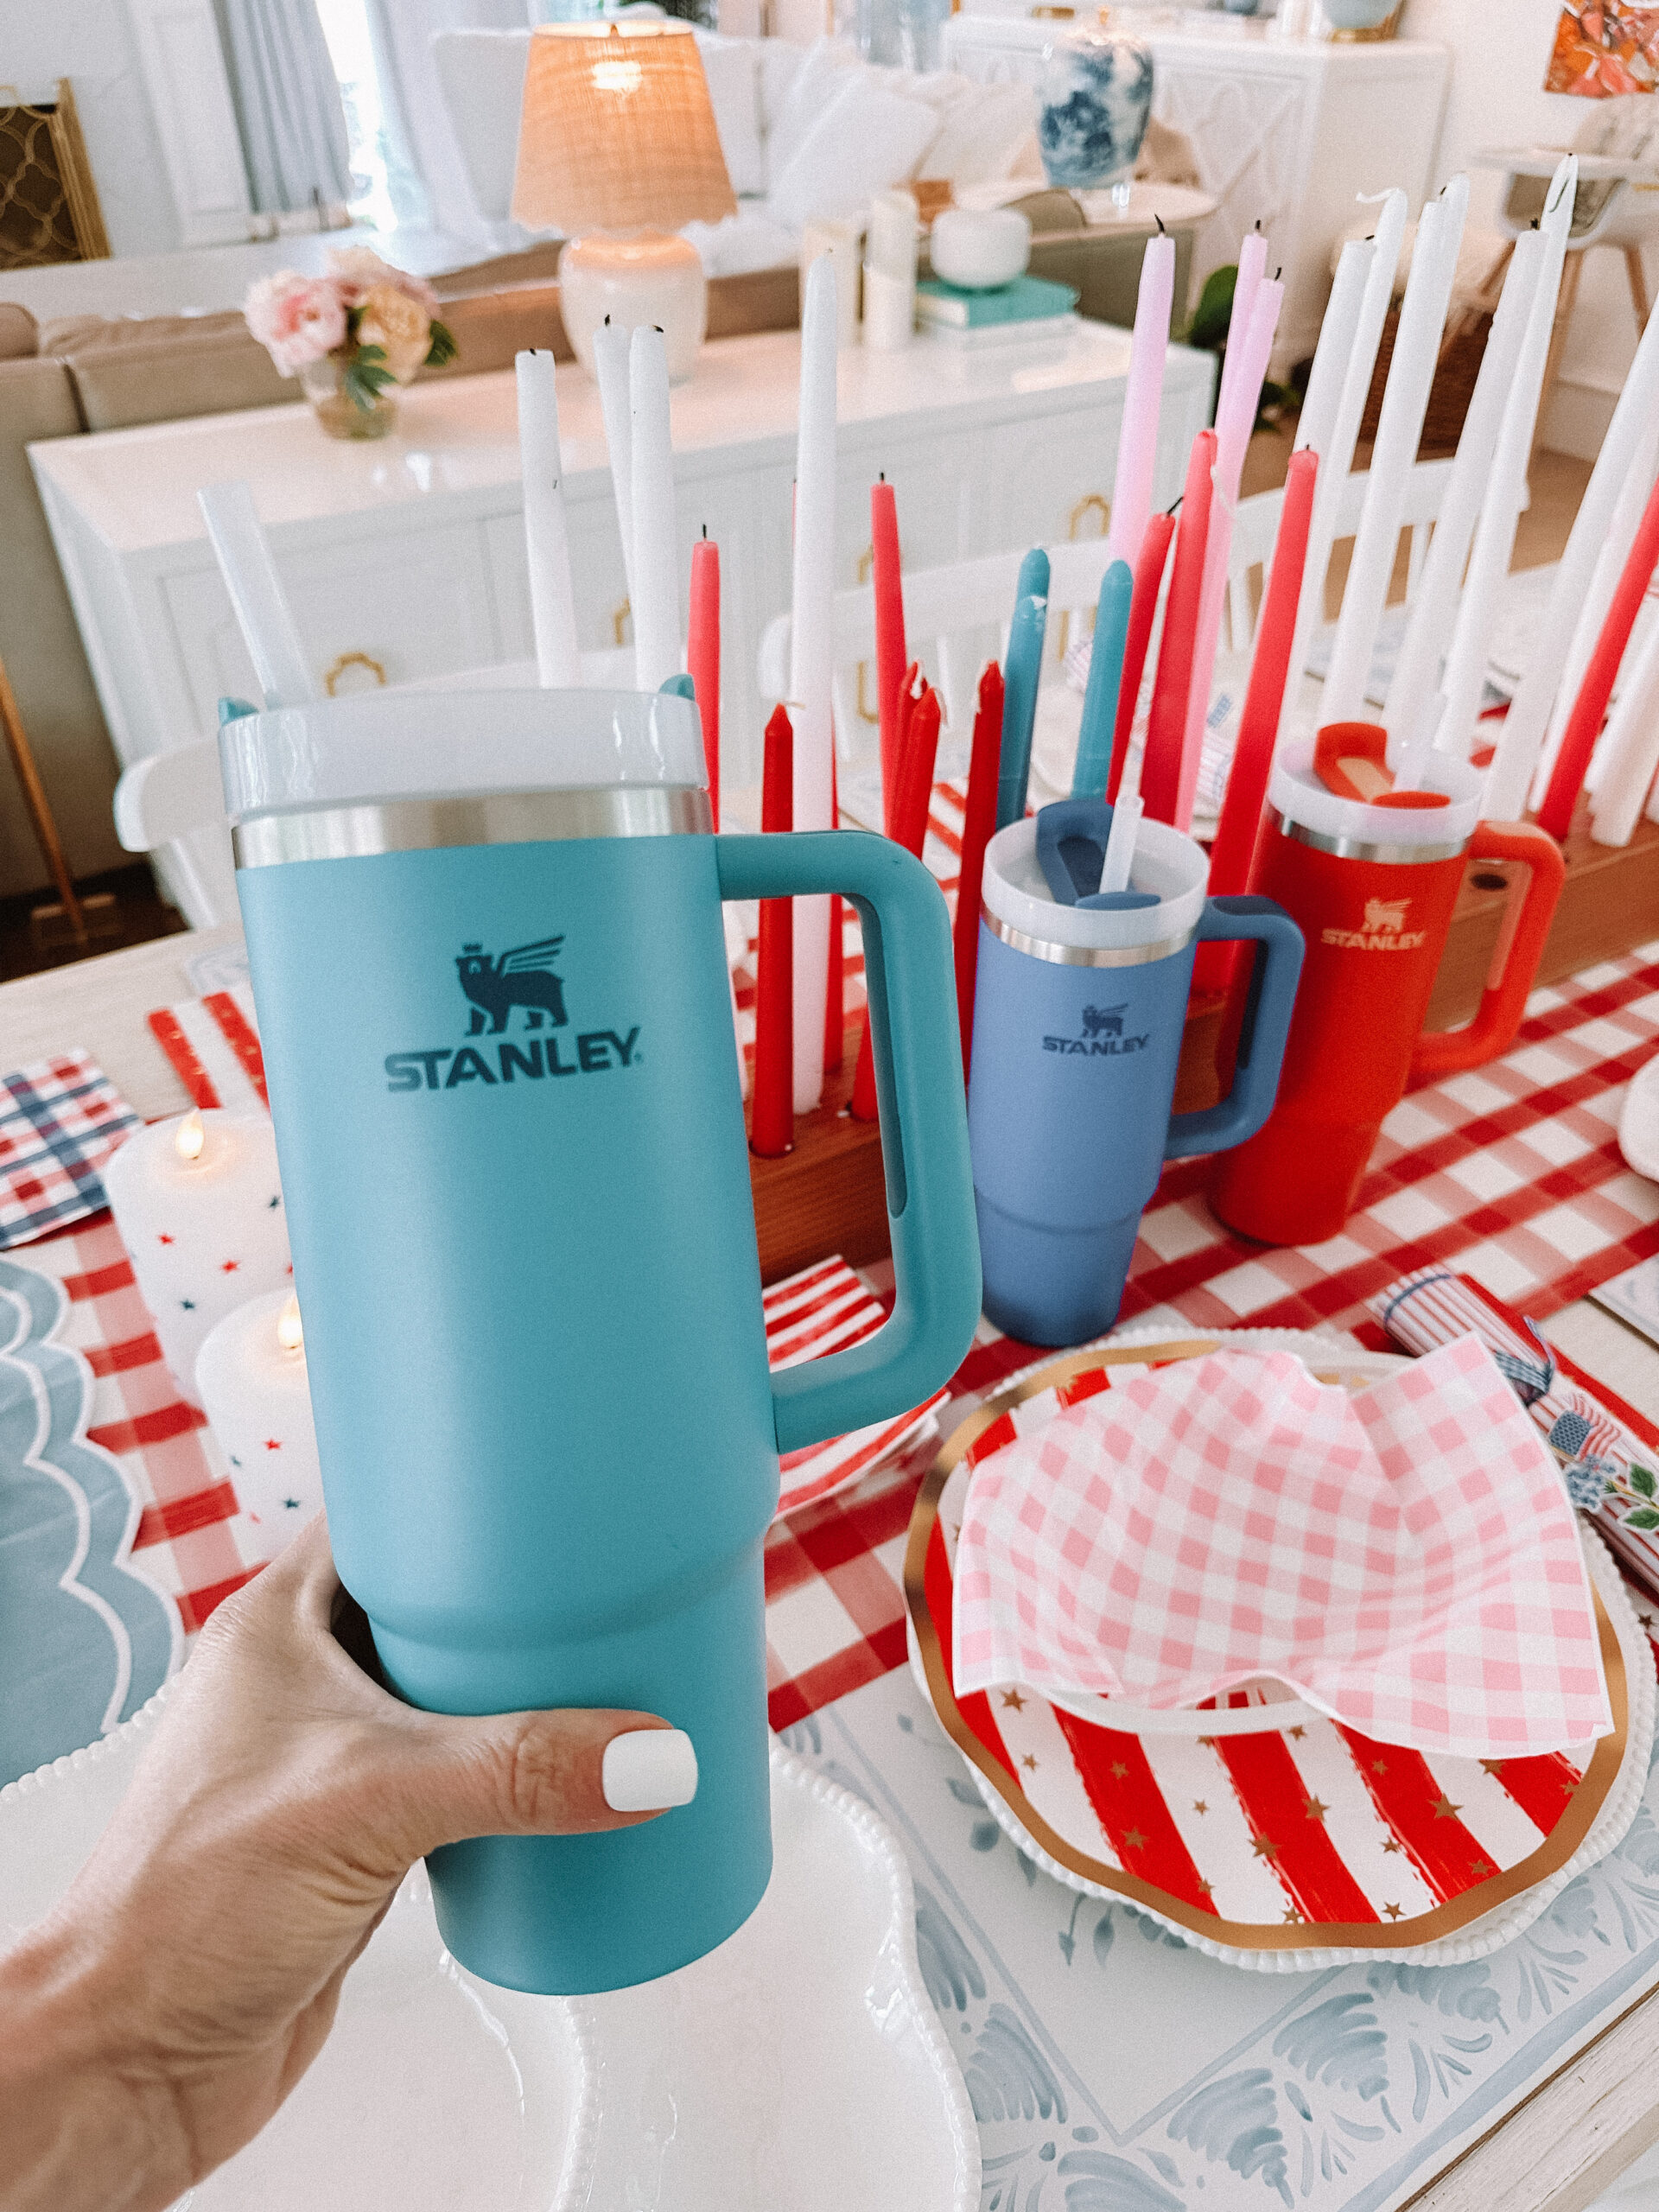 stanley everyones viral tumbler favorite drink for moms 4th of July Table Setting Red Gingham Table Runner Flag Plates Scalloped Plates Wood Candle Holder Star Candles Set Stanley Cup in Pool Patriotic Dinner Table Family 4th of July Celebration 4th of July Backyard Party